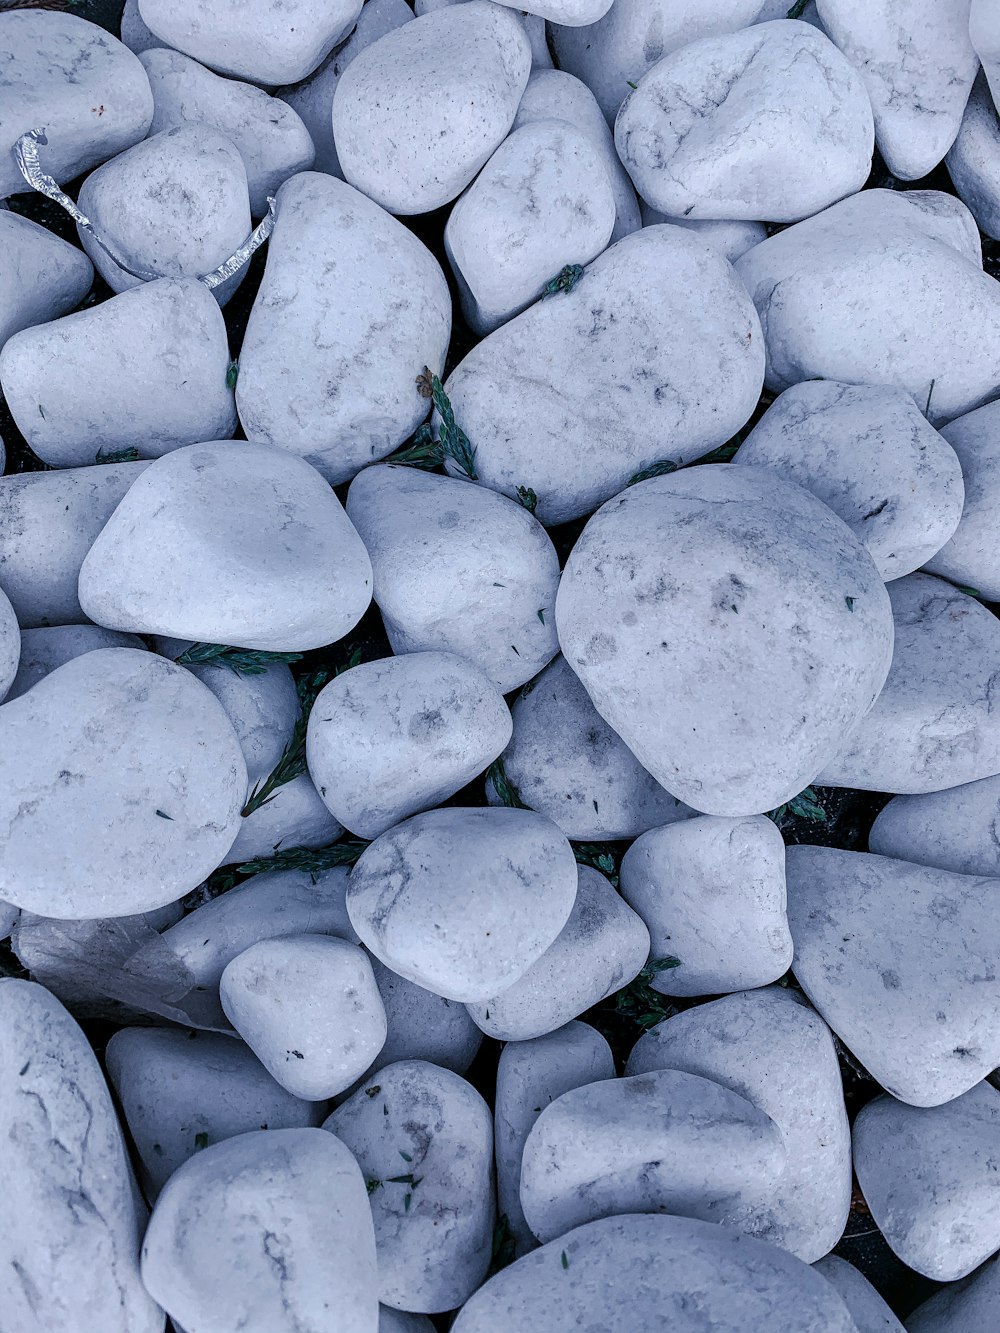 white and black stones in close up photography